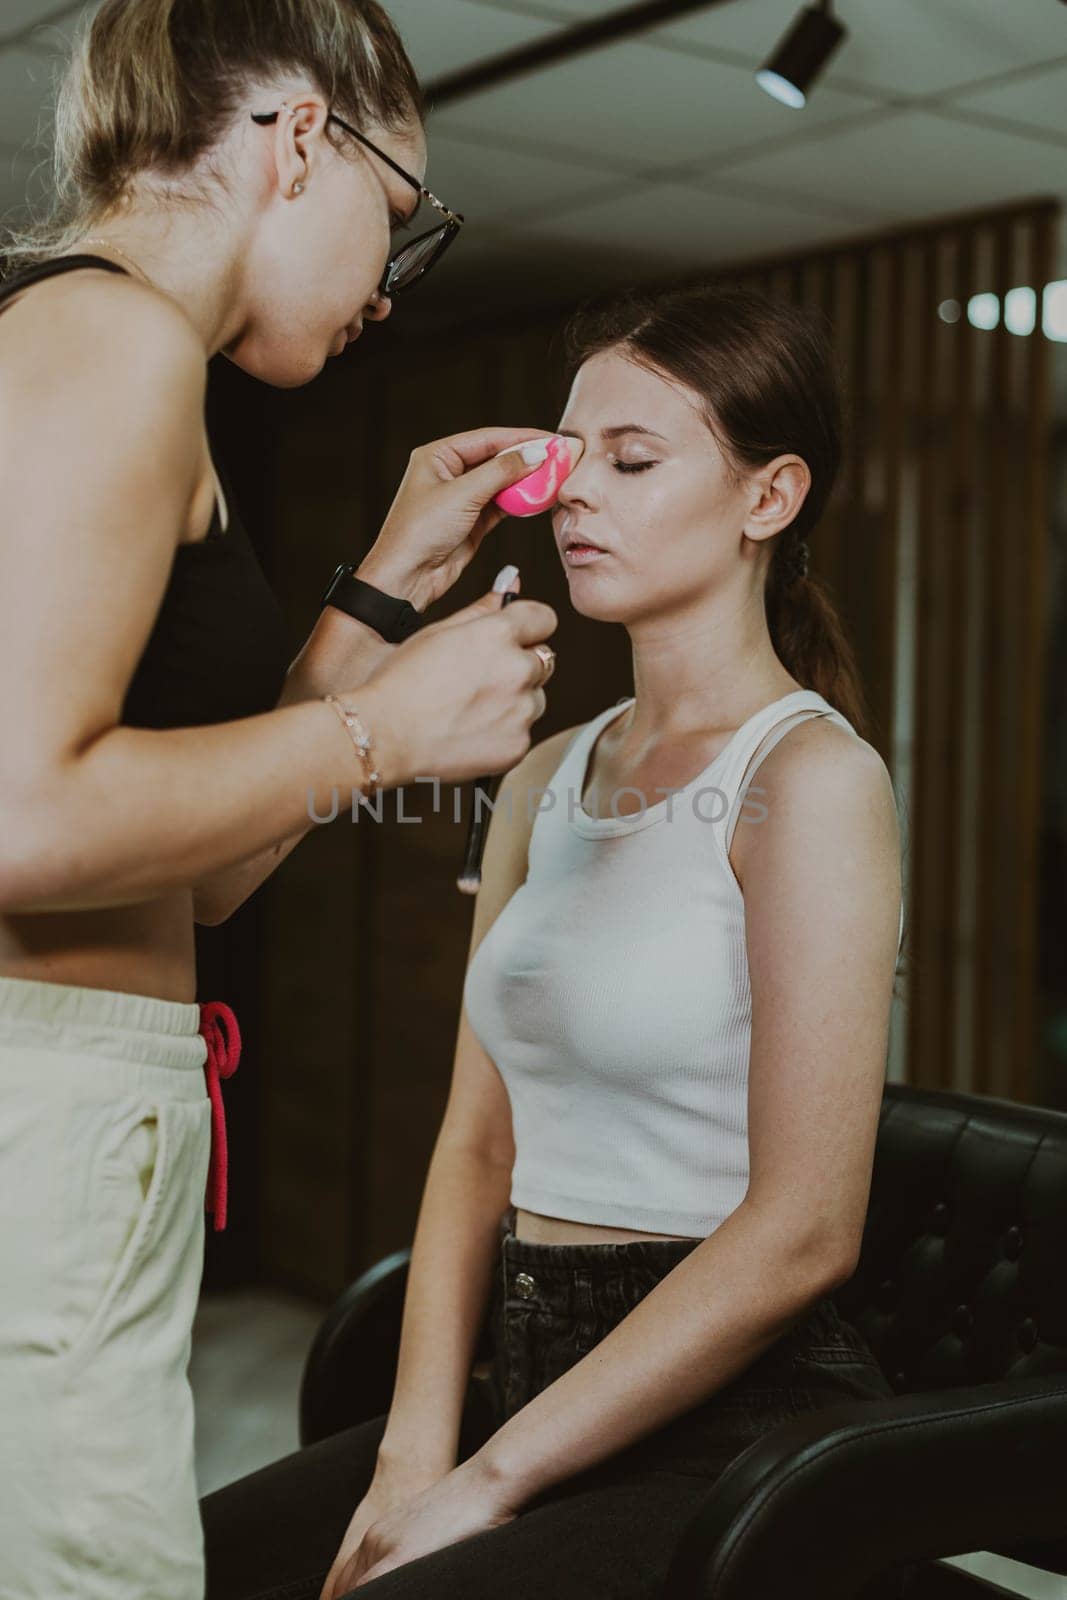 One young handsome Caucasian makeup artist applies foundation with a pink sponge to the eyes of a girl sitting in a chair early in the morning in a beauty salon, close-up side view. Step by step.